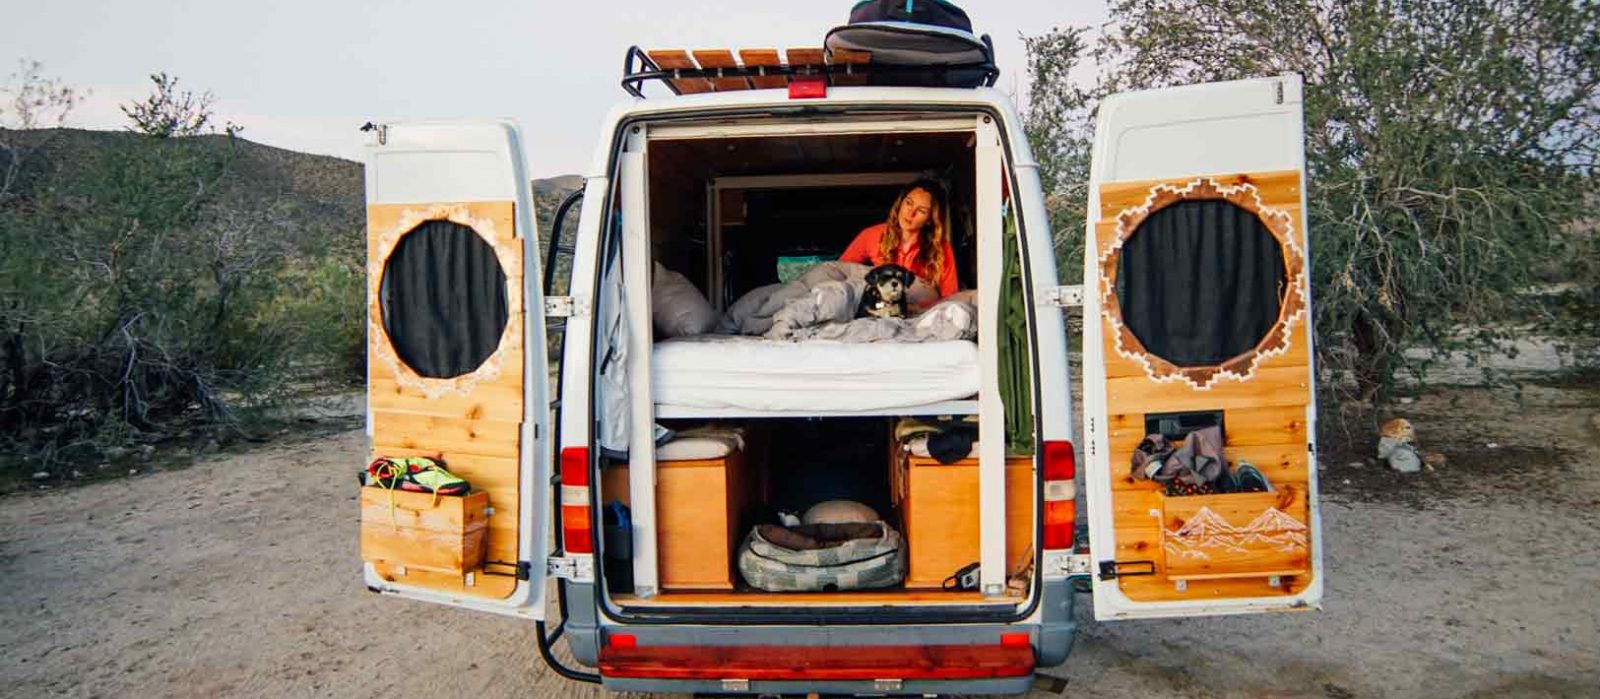 how to remodel a van into a mobile tiny home